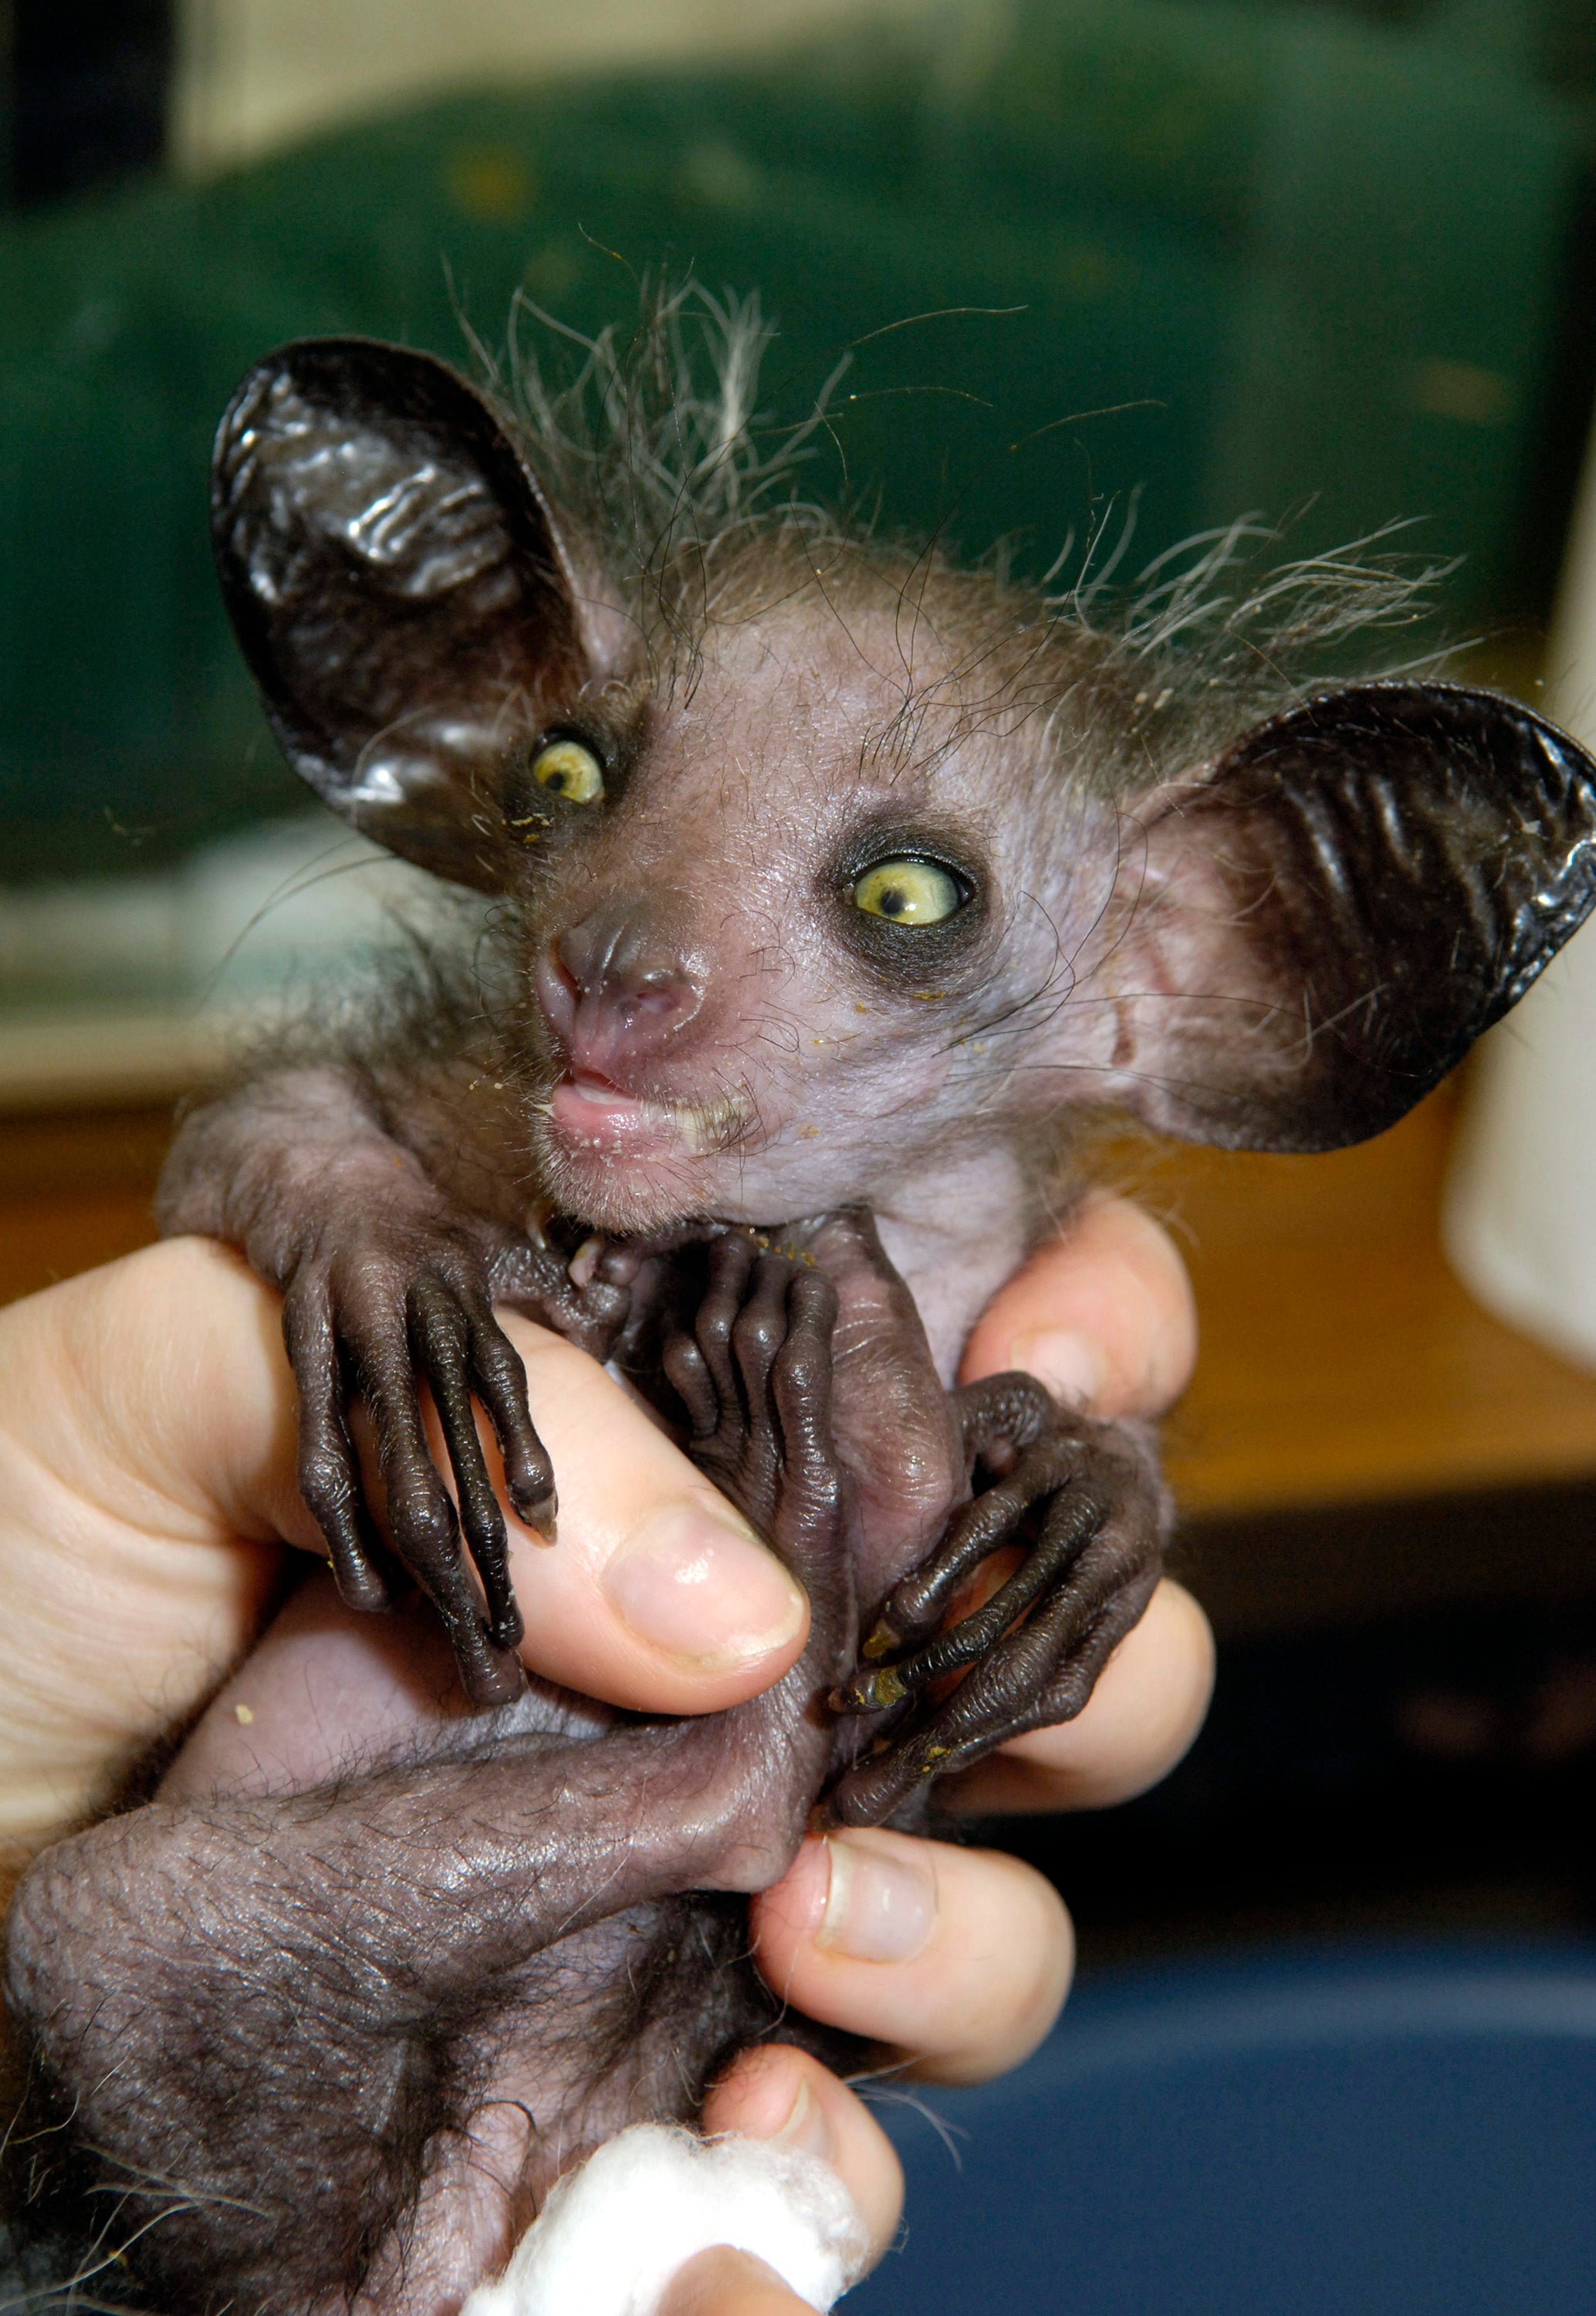 A captive bred aye-aye in the UK. It is adorable. (Photo: Rob Cousins/Bristol Zoo, Getty Images)